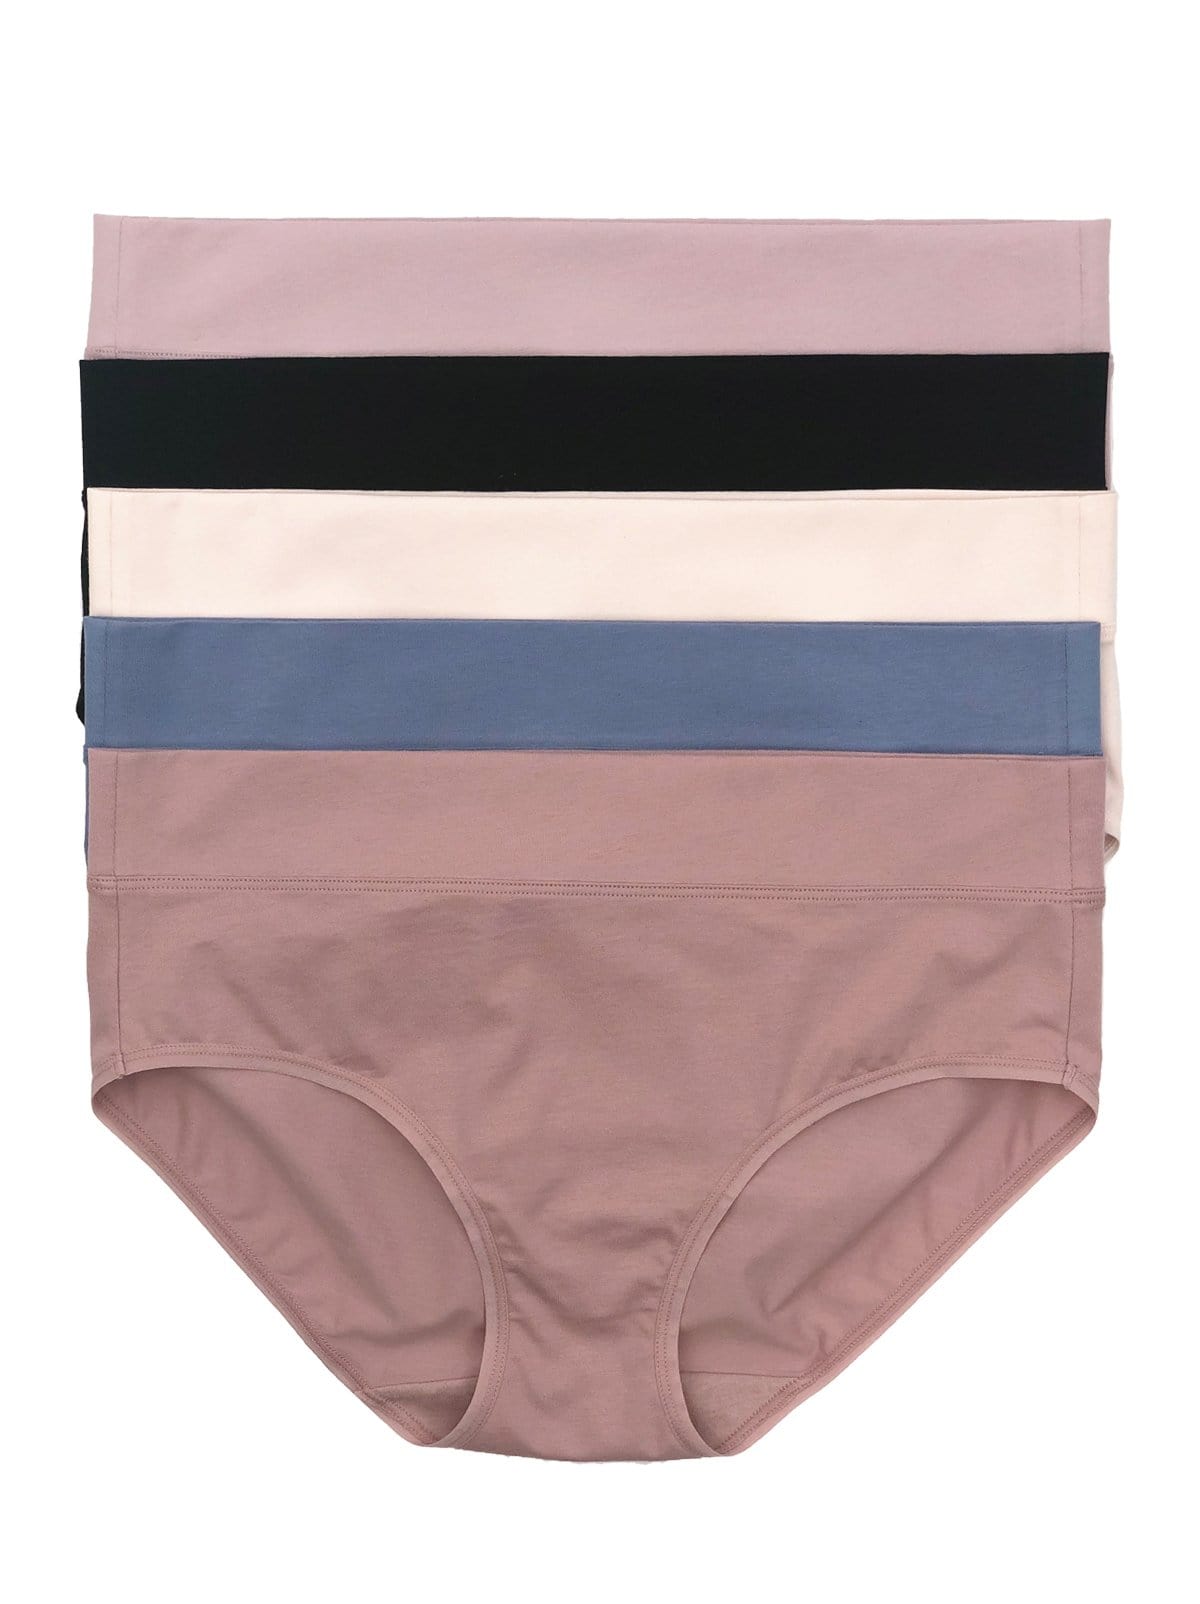 BraTopia - Discover the top 5 basic panties of 2023 👀